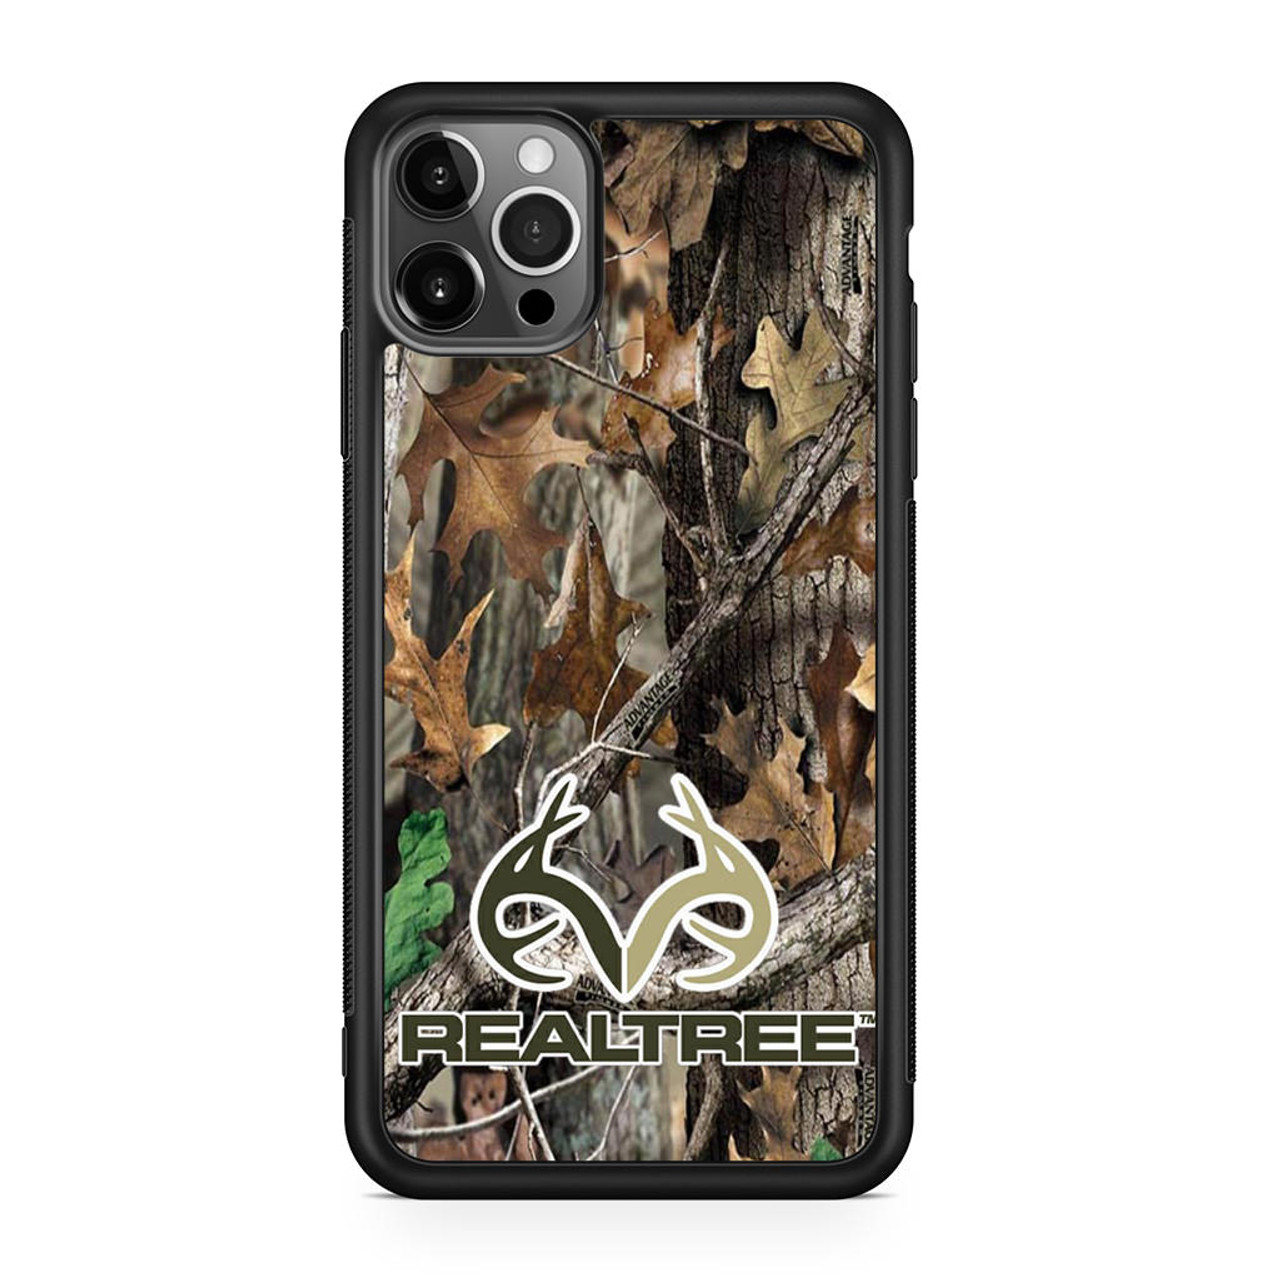 Realtree Ap Camo Hunting Outdoor Iphone 12 Pro Case Caseshunter